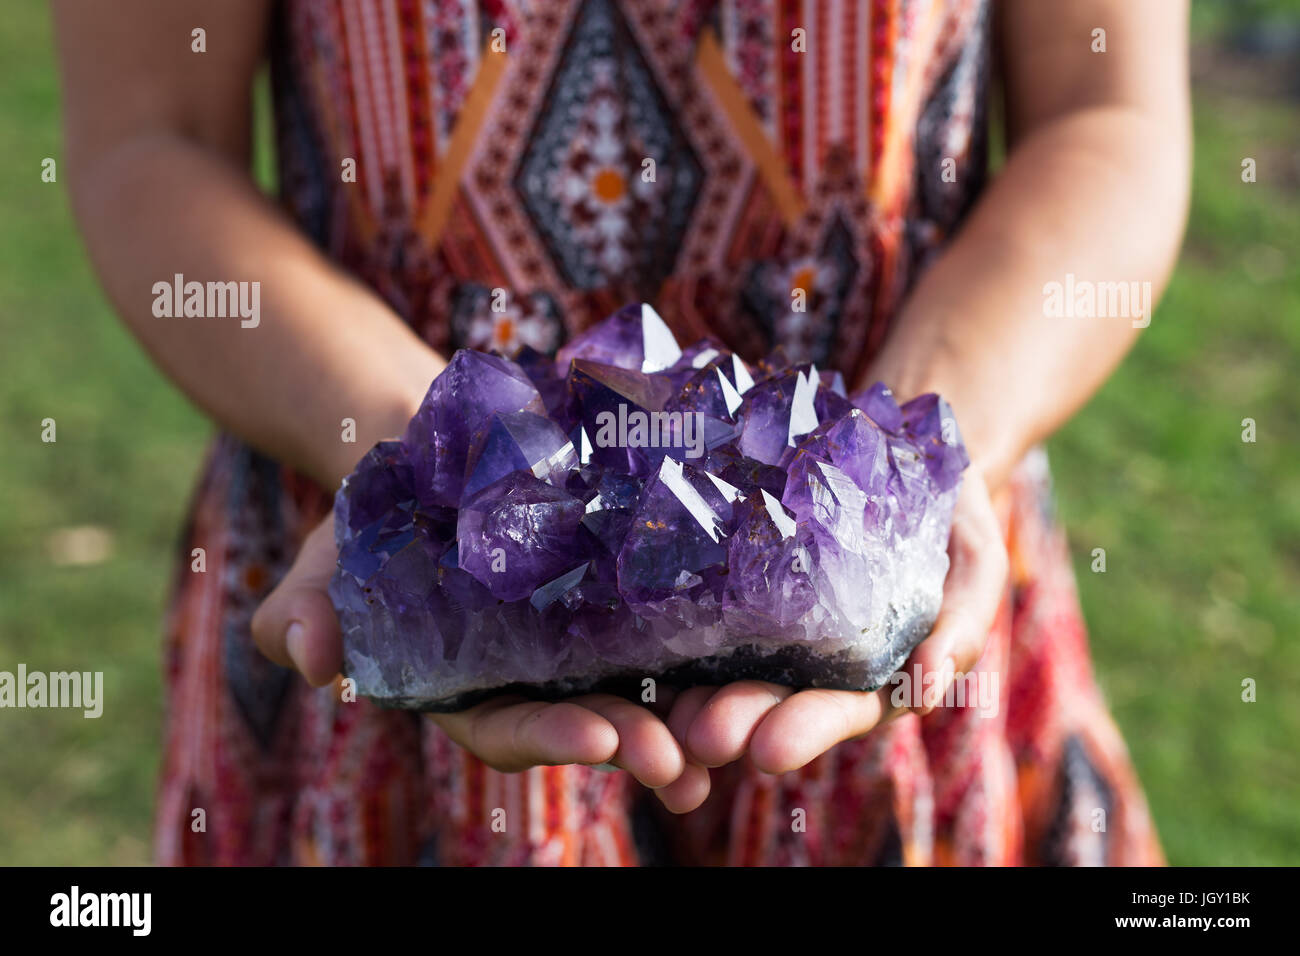 A young woman holds a large cluster of amethyst crystals as they shimmer in the sunlight. Stock Photo